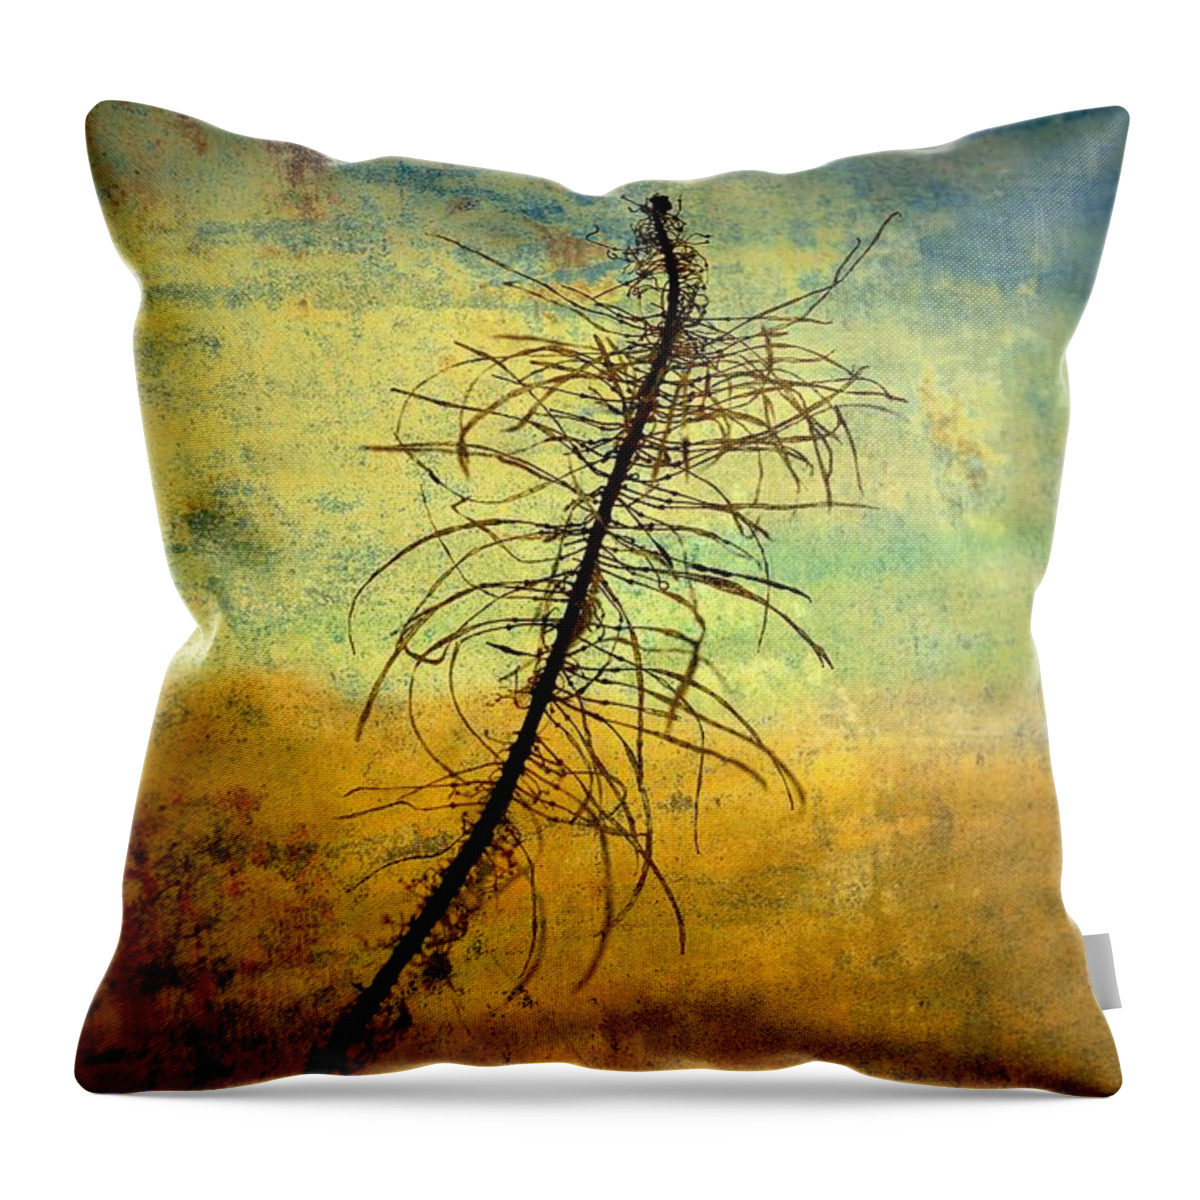 Landscape Throw Pillow featuring the photograph Thoughts So Often by Mark Ross